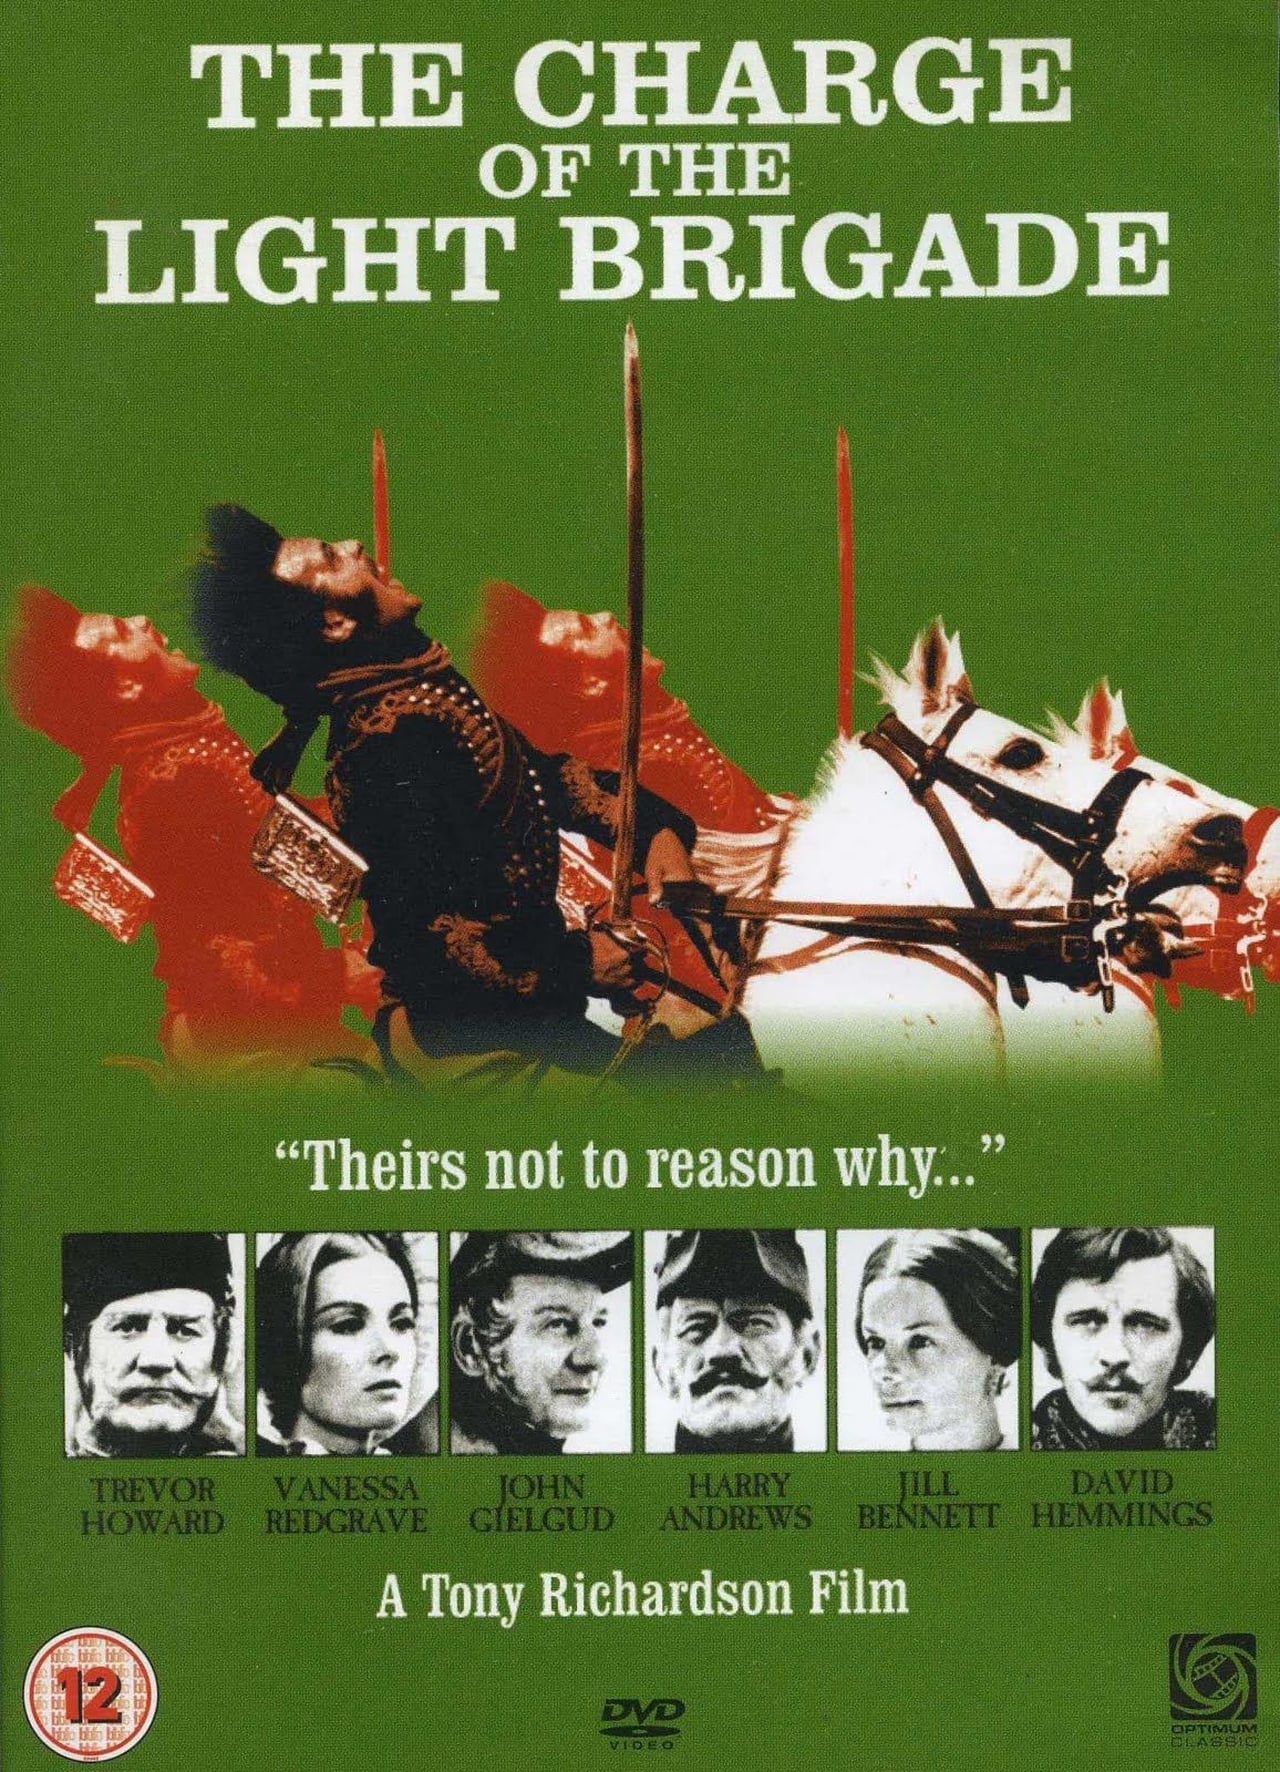 who won the charge of the light brigade